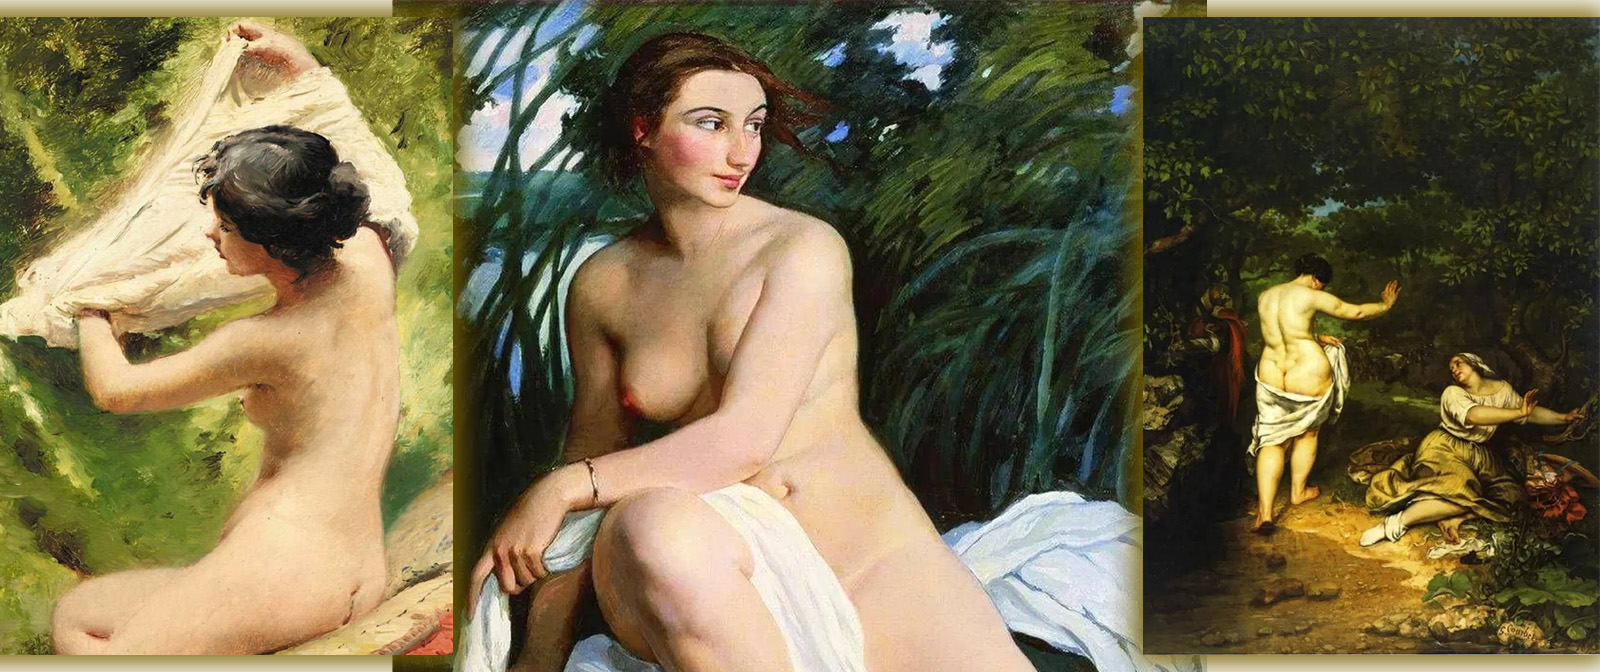 When you can't, but you really want to. Nudes in paintings by Gustave Courbet and Russian artists